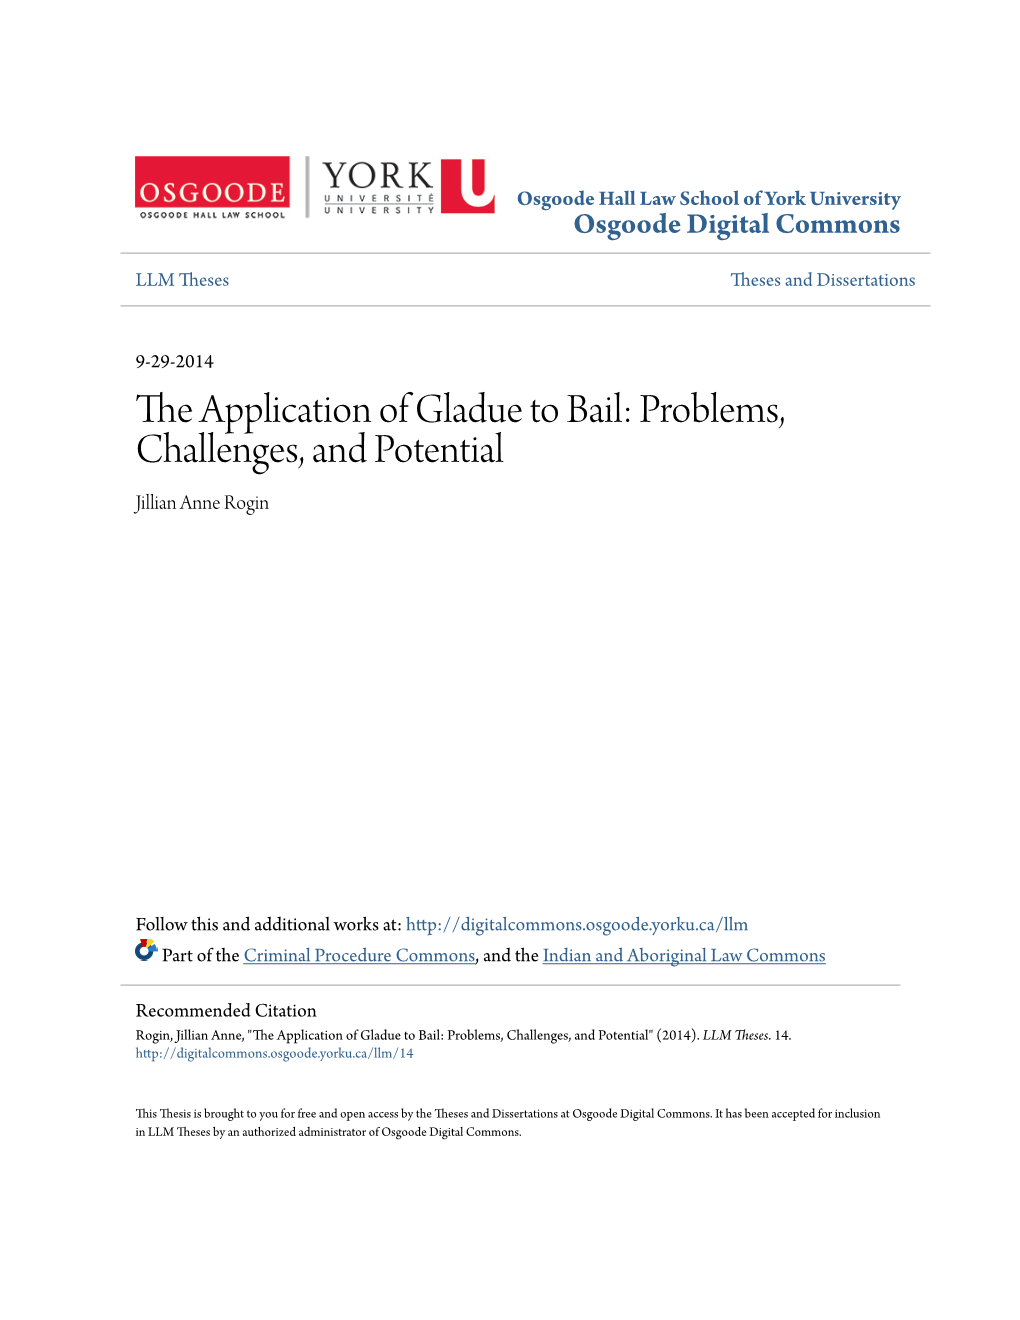 The Application of Gladue to Bail: Problems, Challenges, and Potential Jillian Anne Rogin